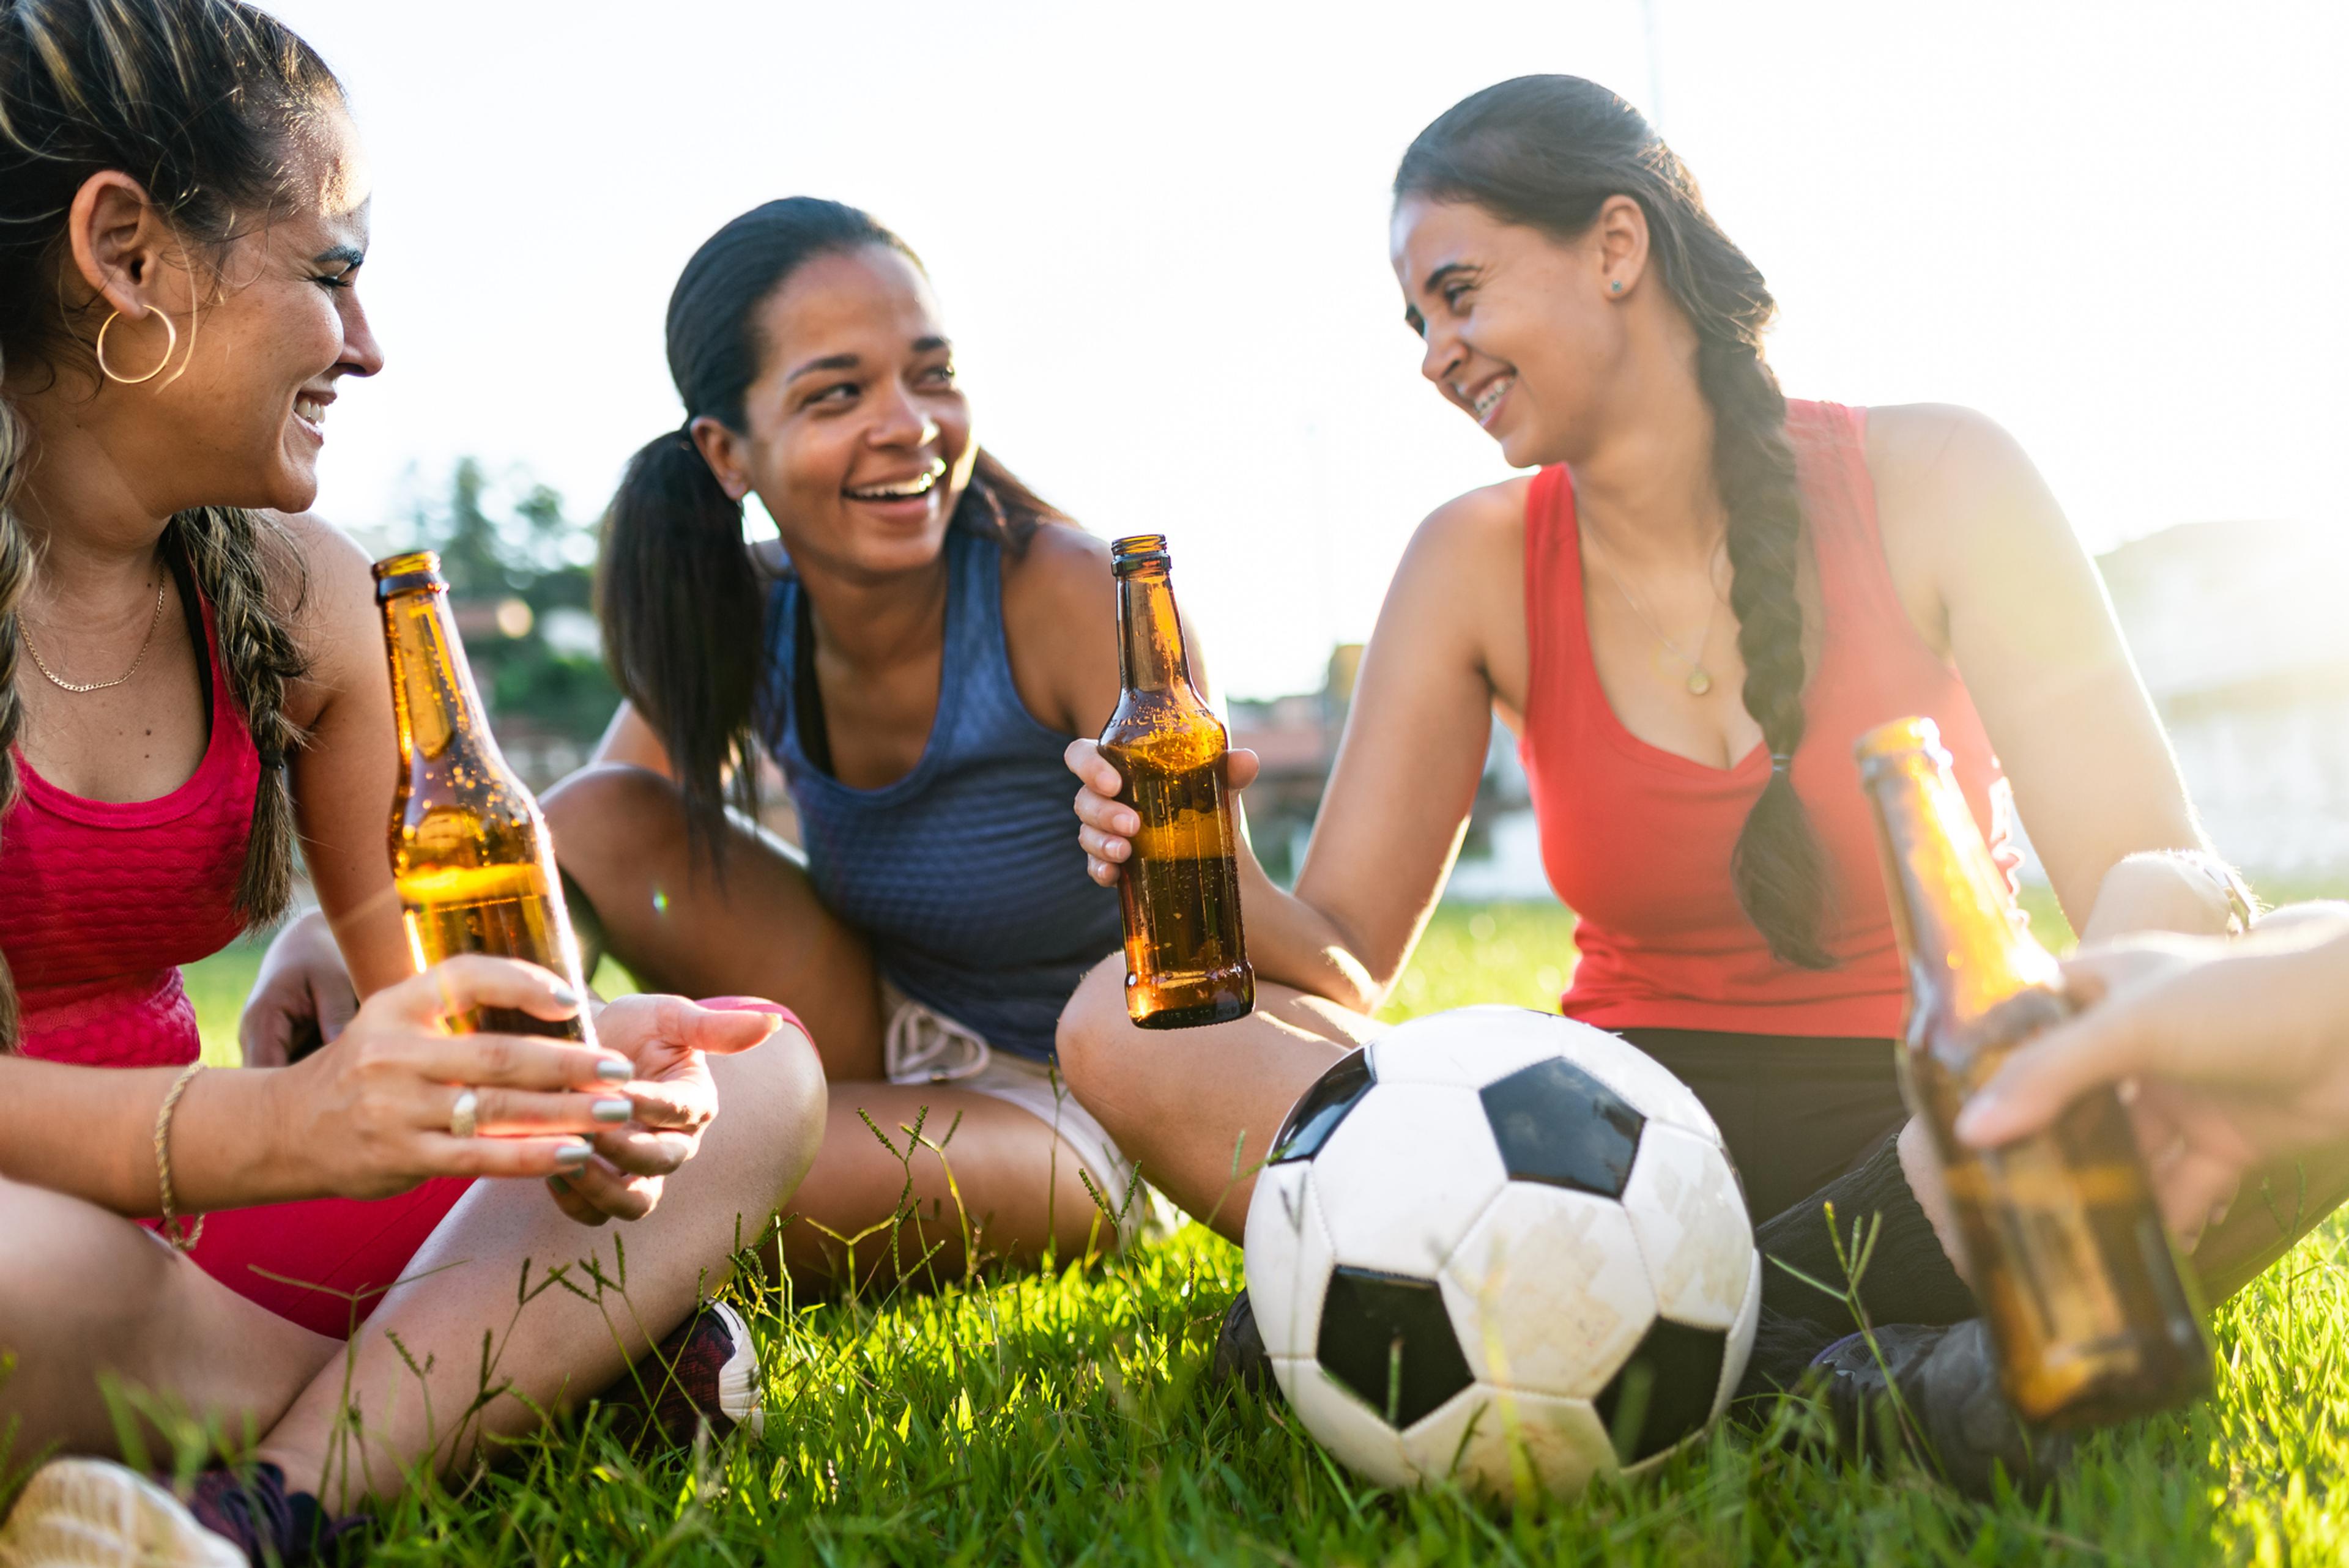 A group of women sitting on a grass field after playing soccer, sharing bottled beers.